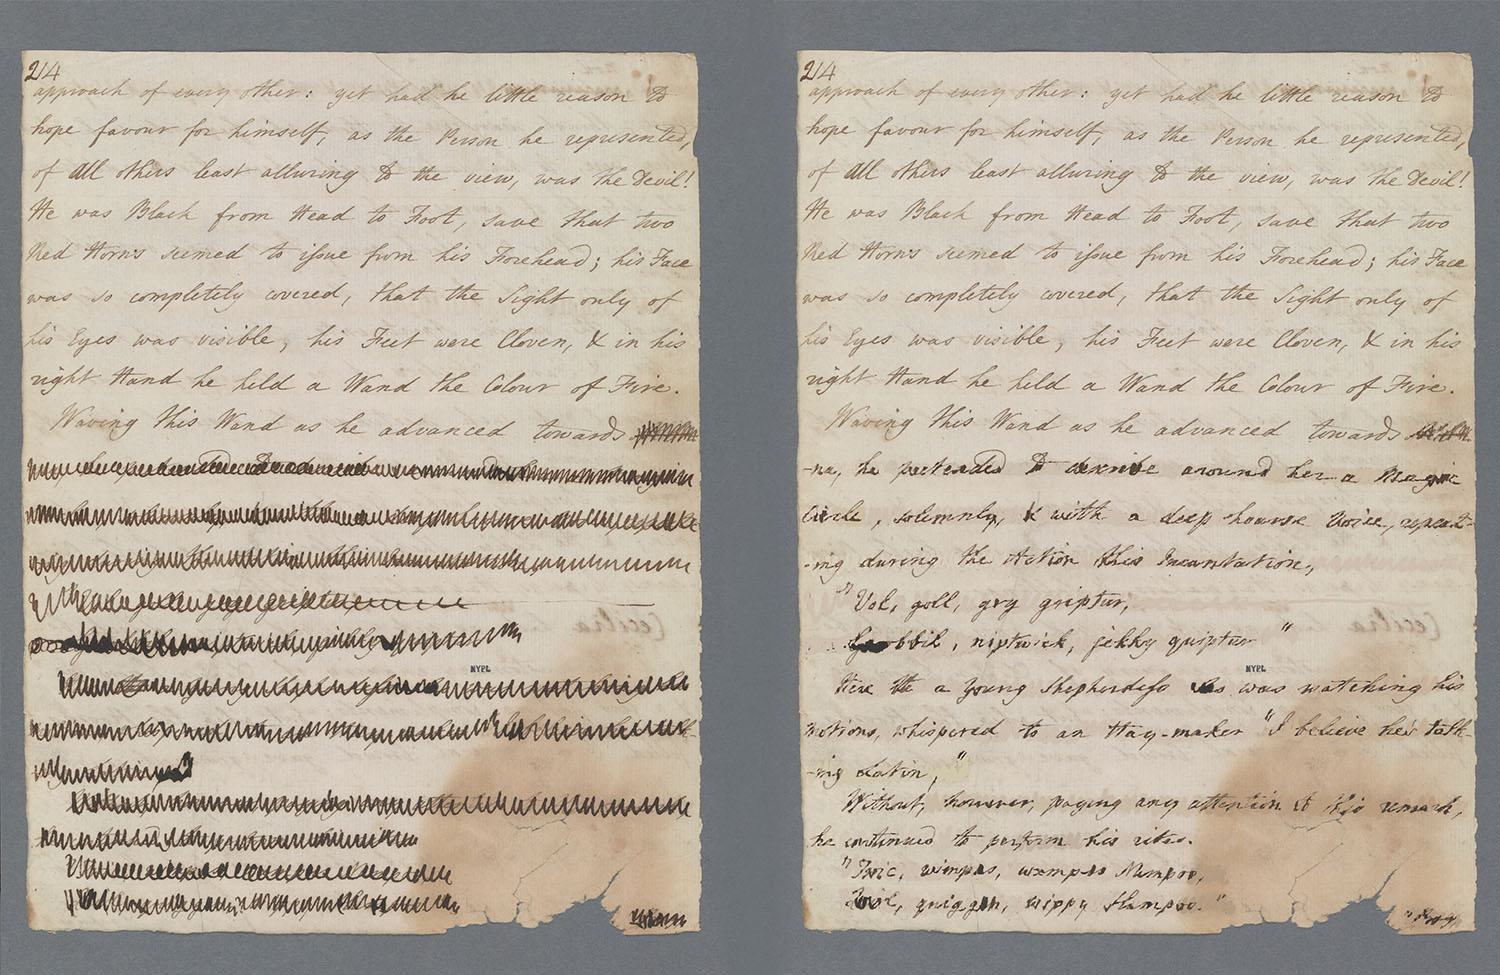 Two versions of a handwritten page from the Cecilia manuscript shown side-by-side, demonstrating how digital tools can remove markings and reveal original text.